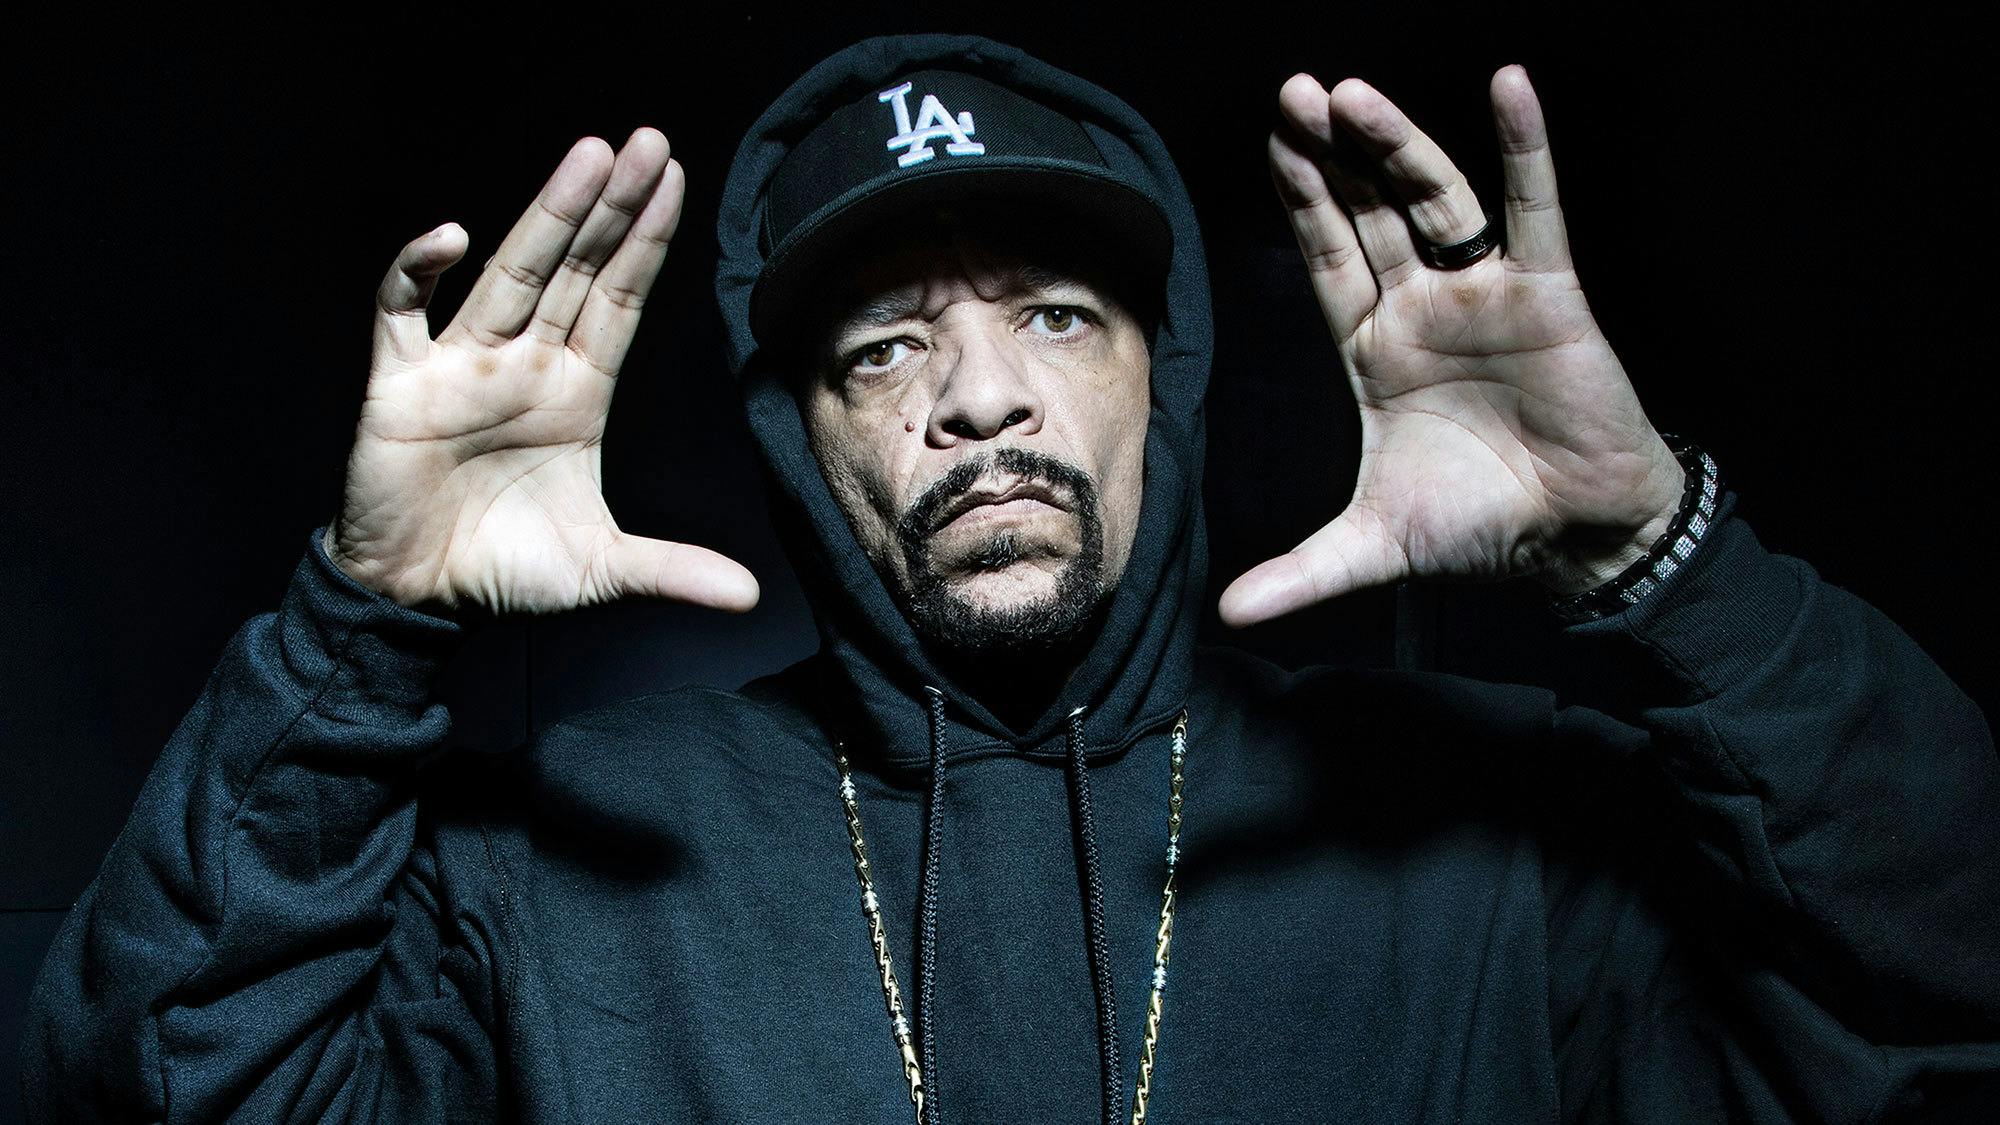 Ice-T: “I play one on TV, but cops can still kiss my ass”